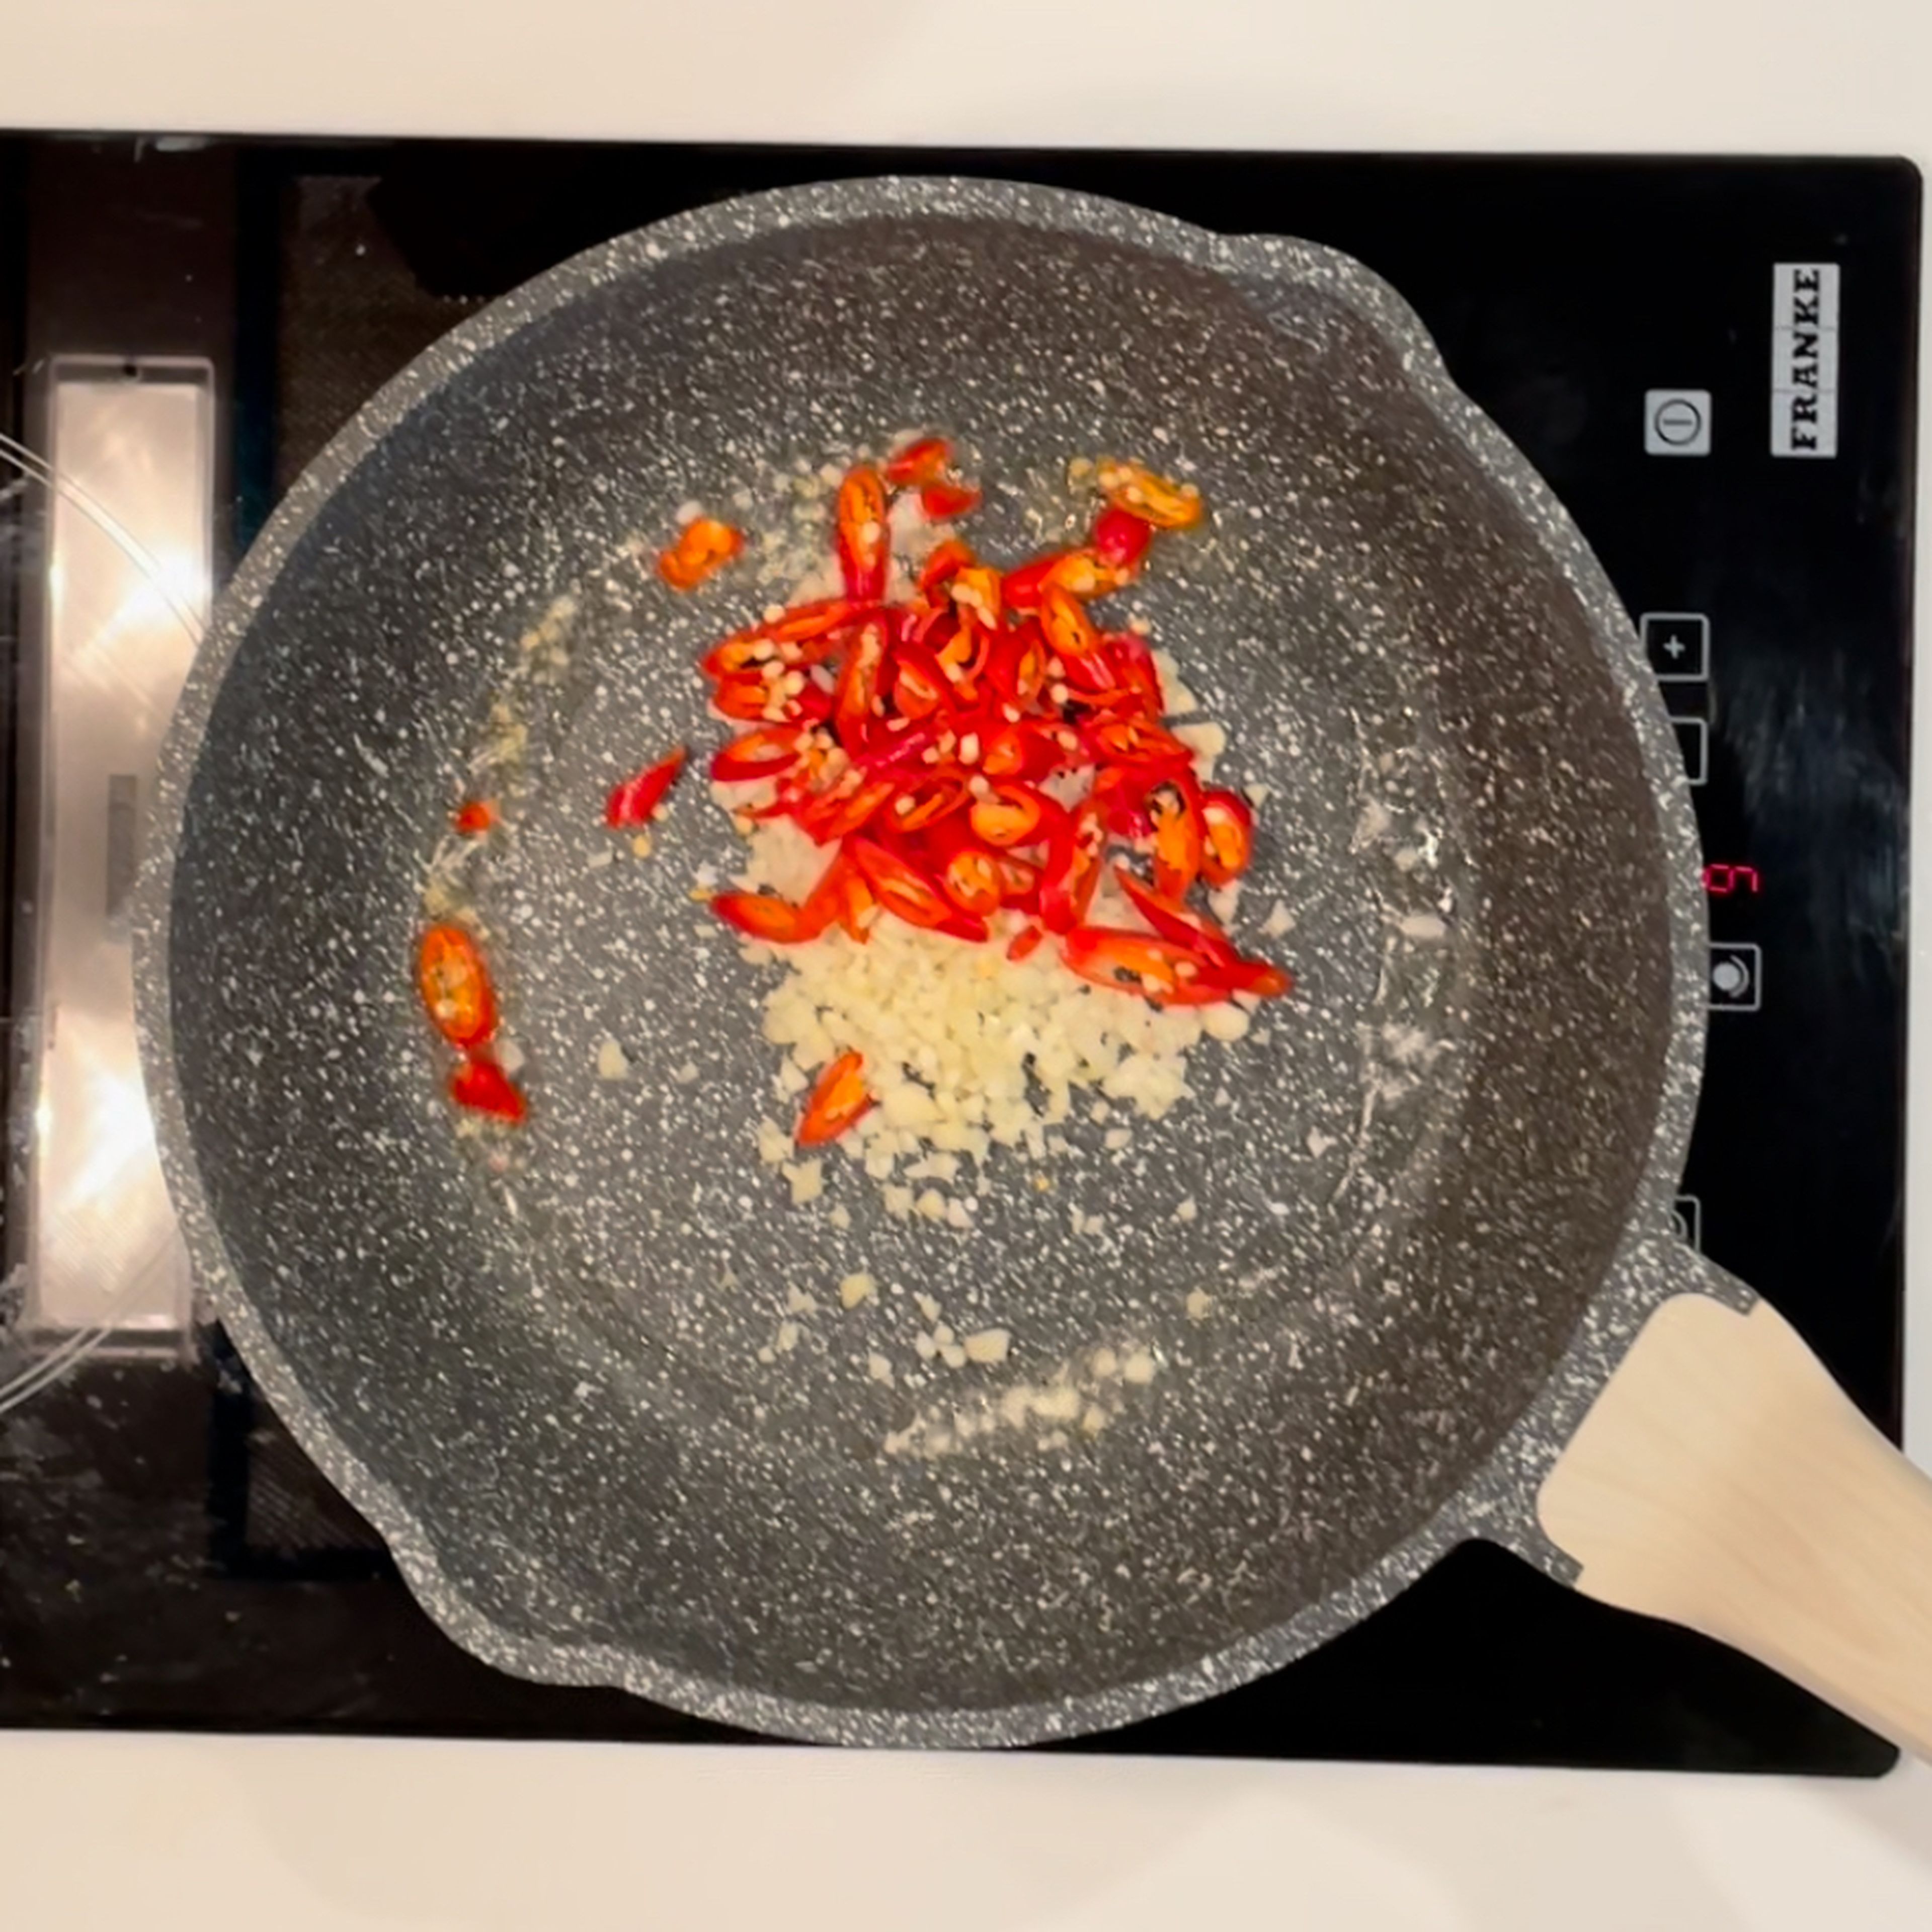 To make Pad Kra Pao, Heat your wok on high heat. Add vegetable oil until oil is hot, add the chilies and garlic. Stir fry until the garlic starts to turn golden. Add chicken and toss until they're no longer in big clumps.